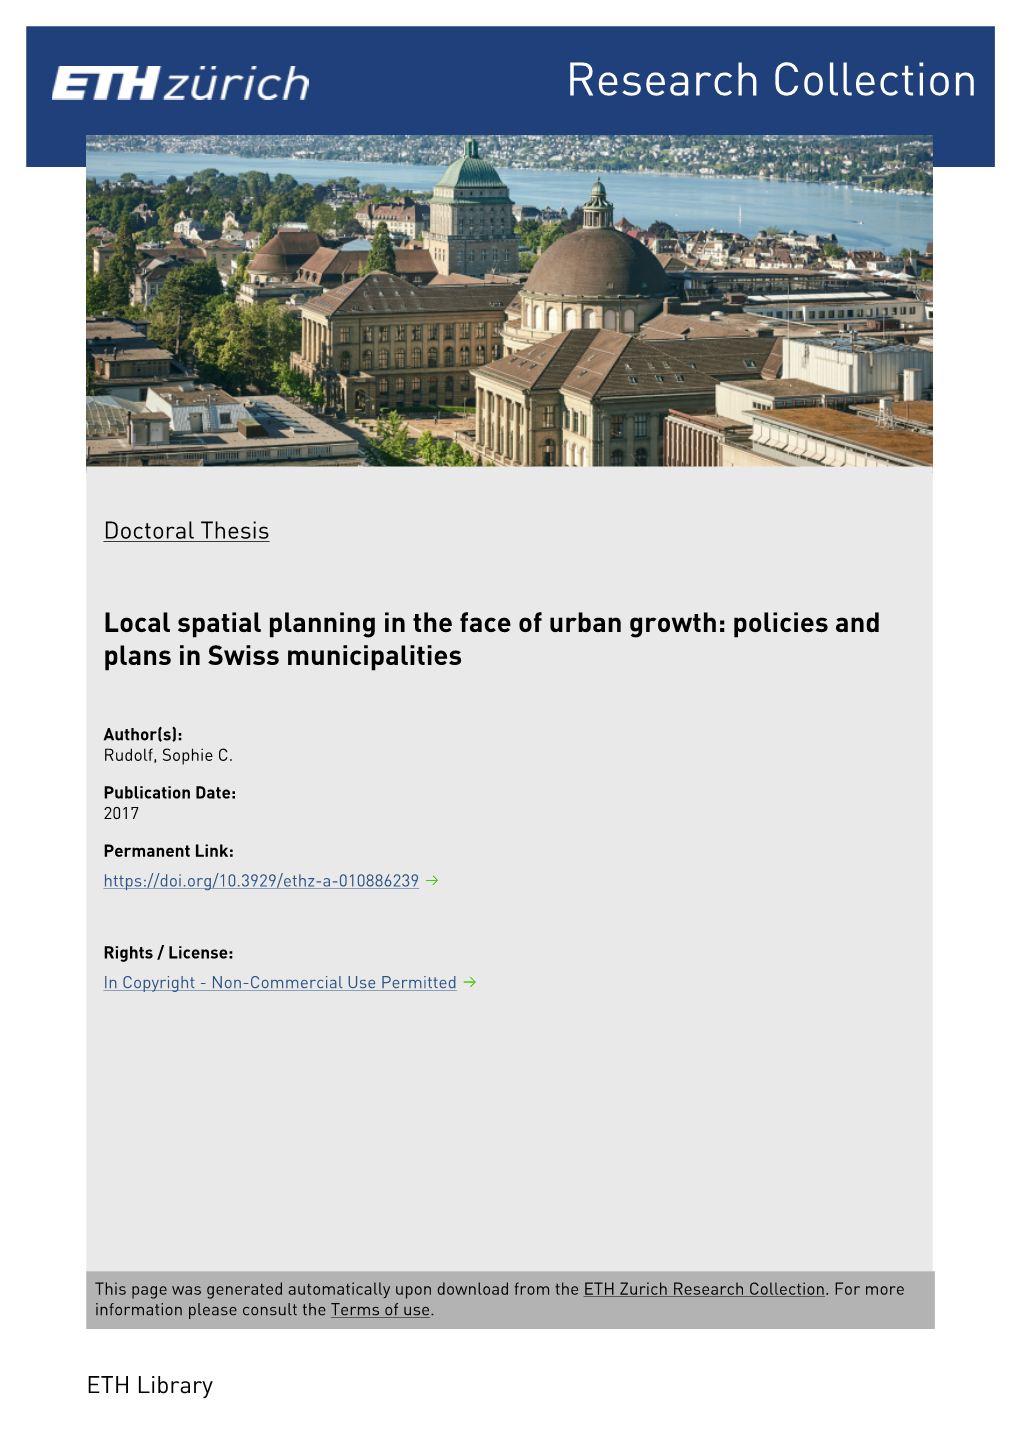 Local Spatial Planning in the Face of Urban Growth: Policies and Plans in Swiss Municipalities